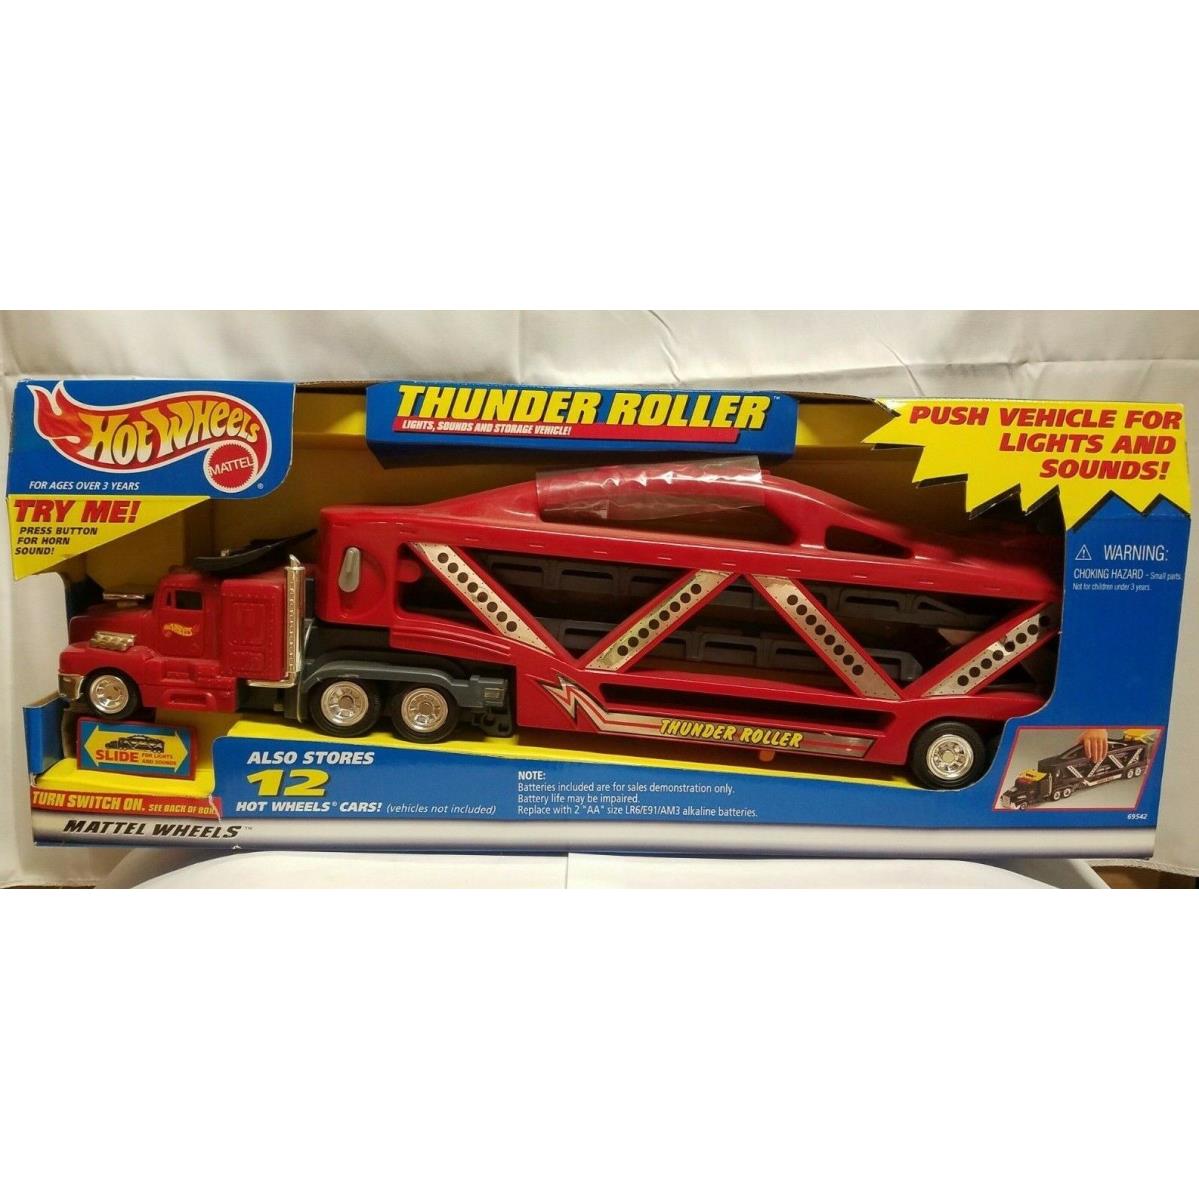 Red Hot Wheels Thunder Roller 1998 Stores 12 Cars